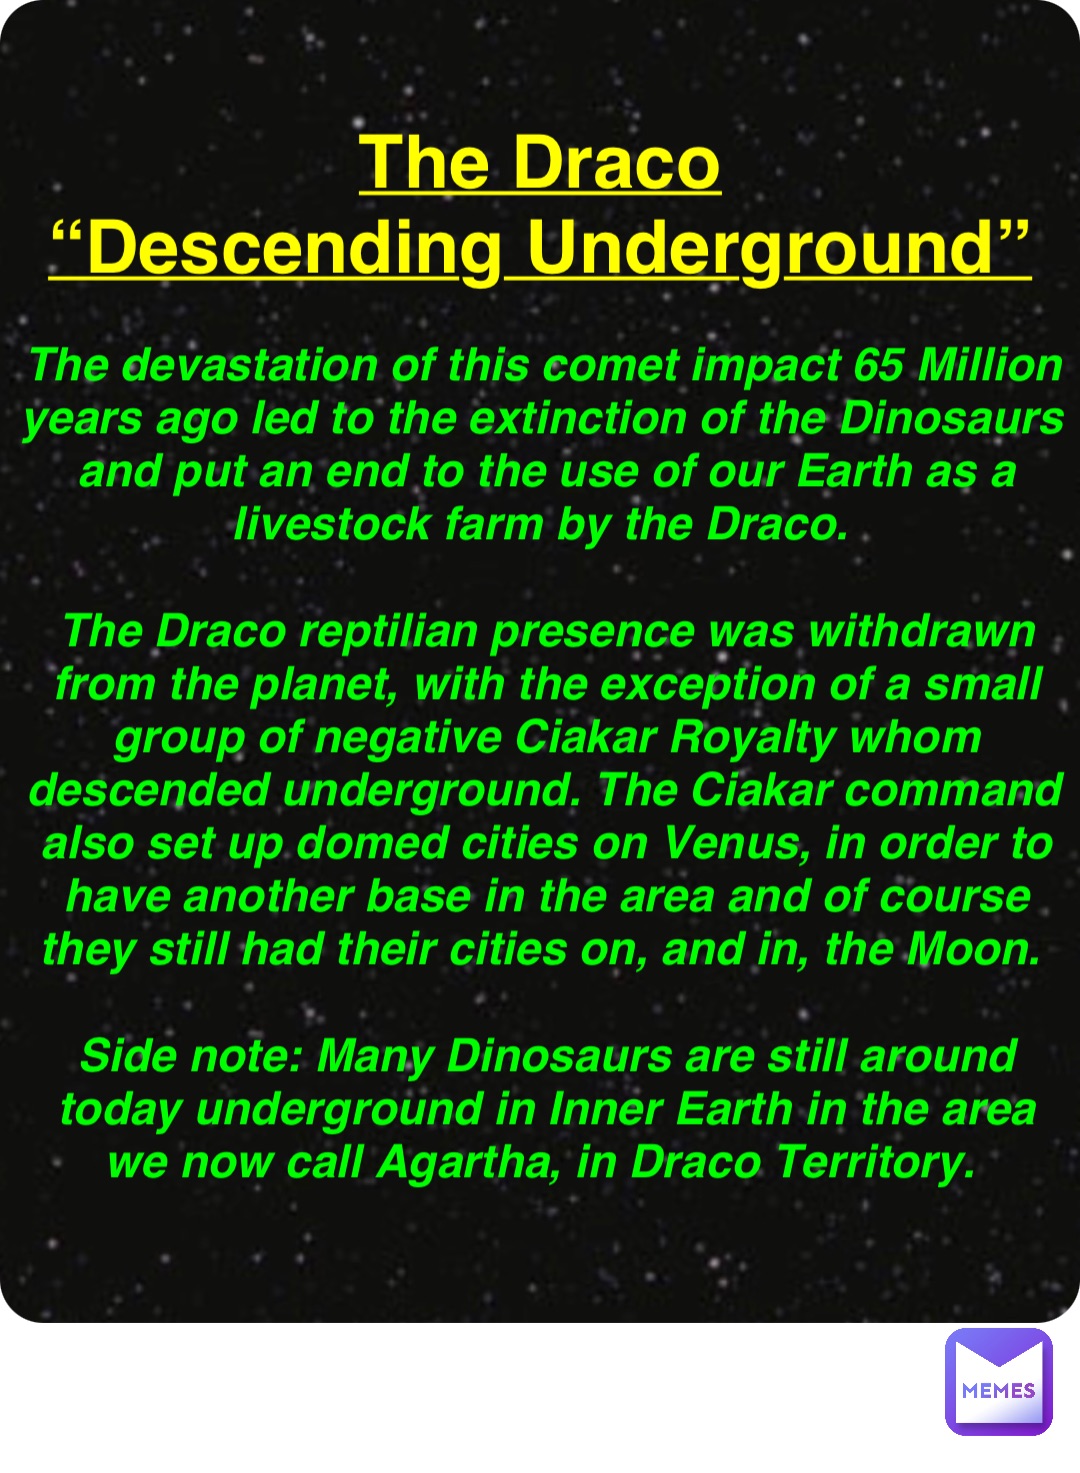 Double tap to edit The Draco
“Descending Underground” The devastation of this comet impact 65 Million years ago led to the extinction of the Dinosaurs and put an end to the use of our Earth as a livestock farm by the Draco.

The Draco reptilian presence was withdrawn from the planet, with the exception of a small group of negative Ciakar Royalty whom descended underground. The Ciakar command also set up domed cities on Venus, in order to have another base in the area and of course they still had their cities on, and in, the Moon.

Side note: Many Dinosaurs are still around today underground in Inner Earth in the area we now call Agartha, in Draco Territory.